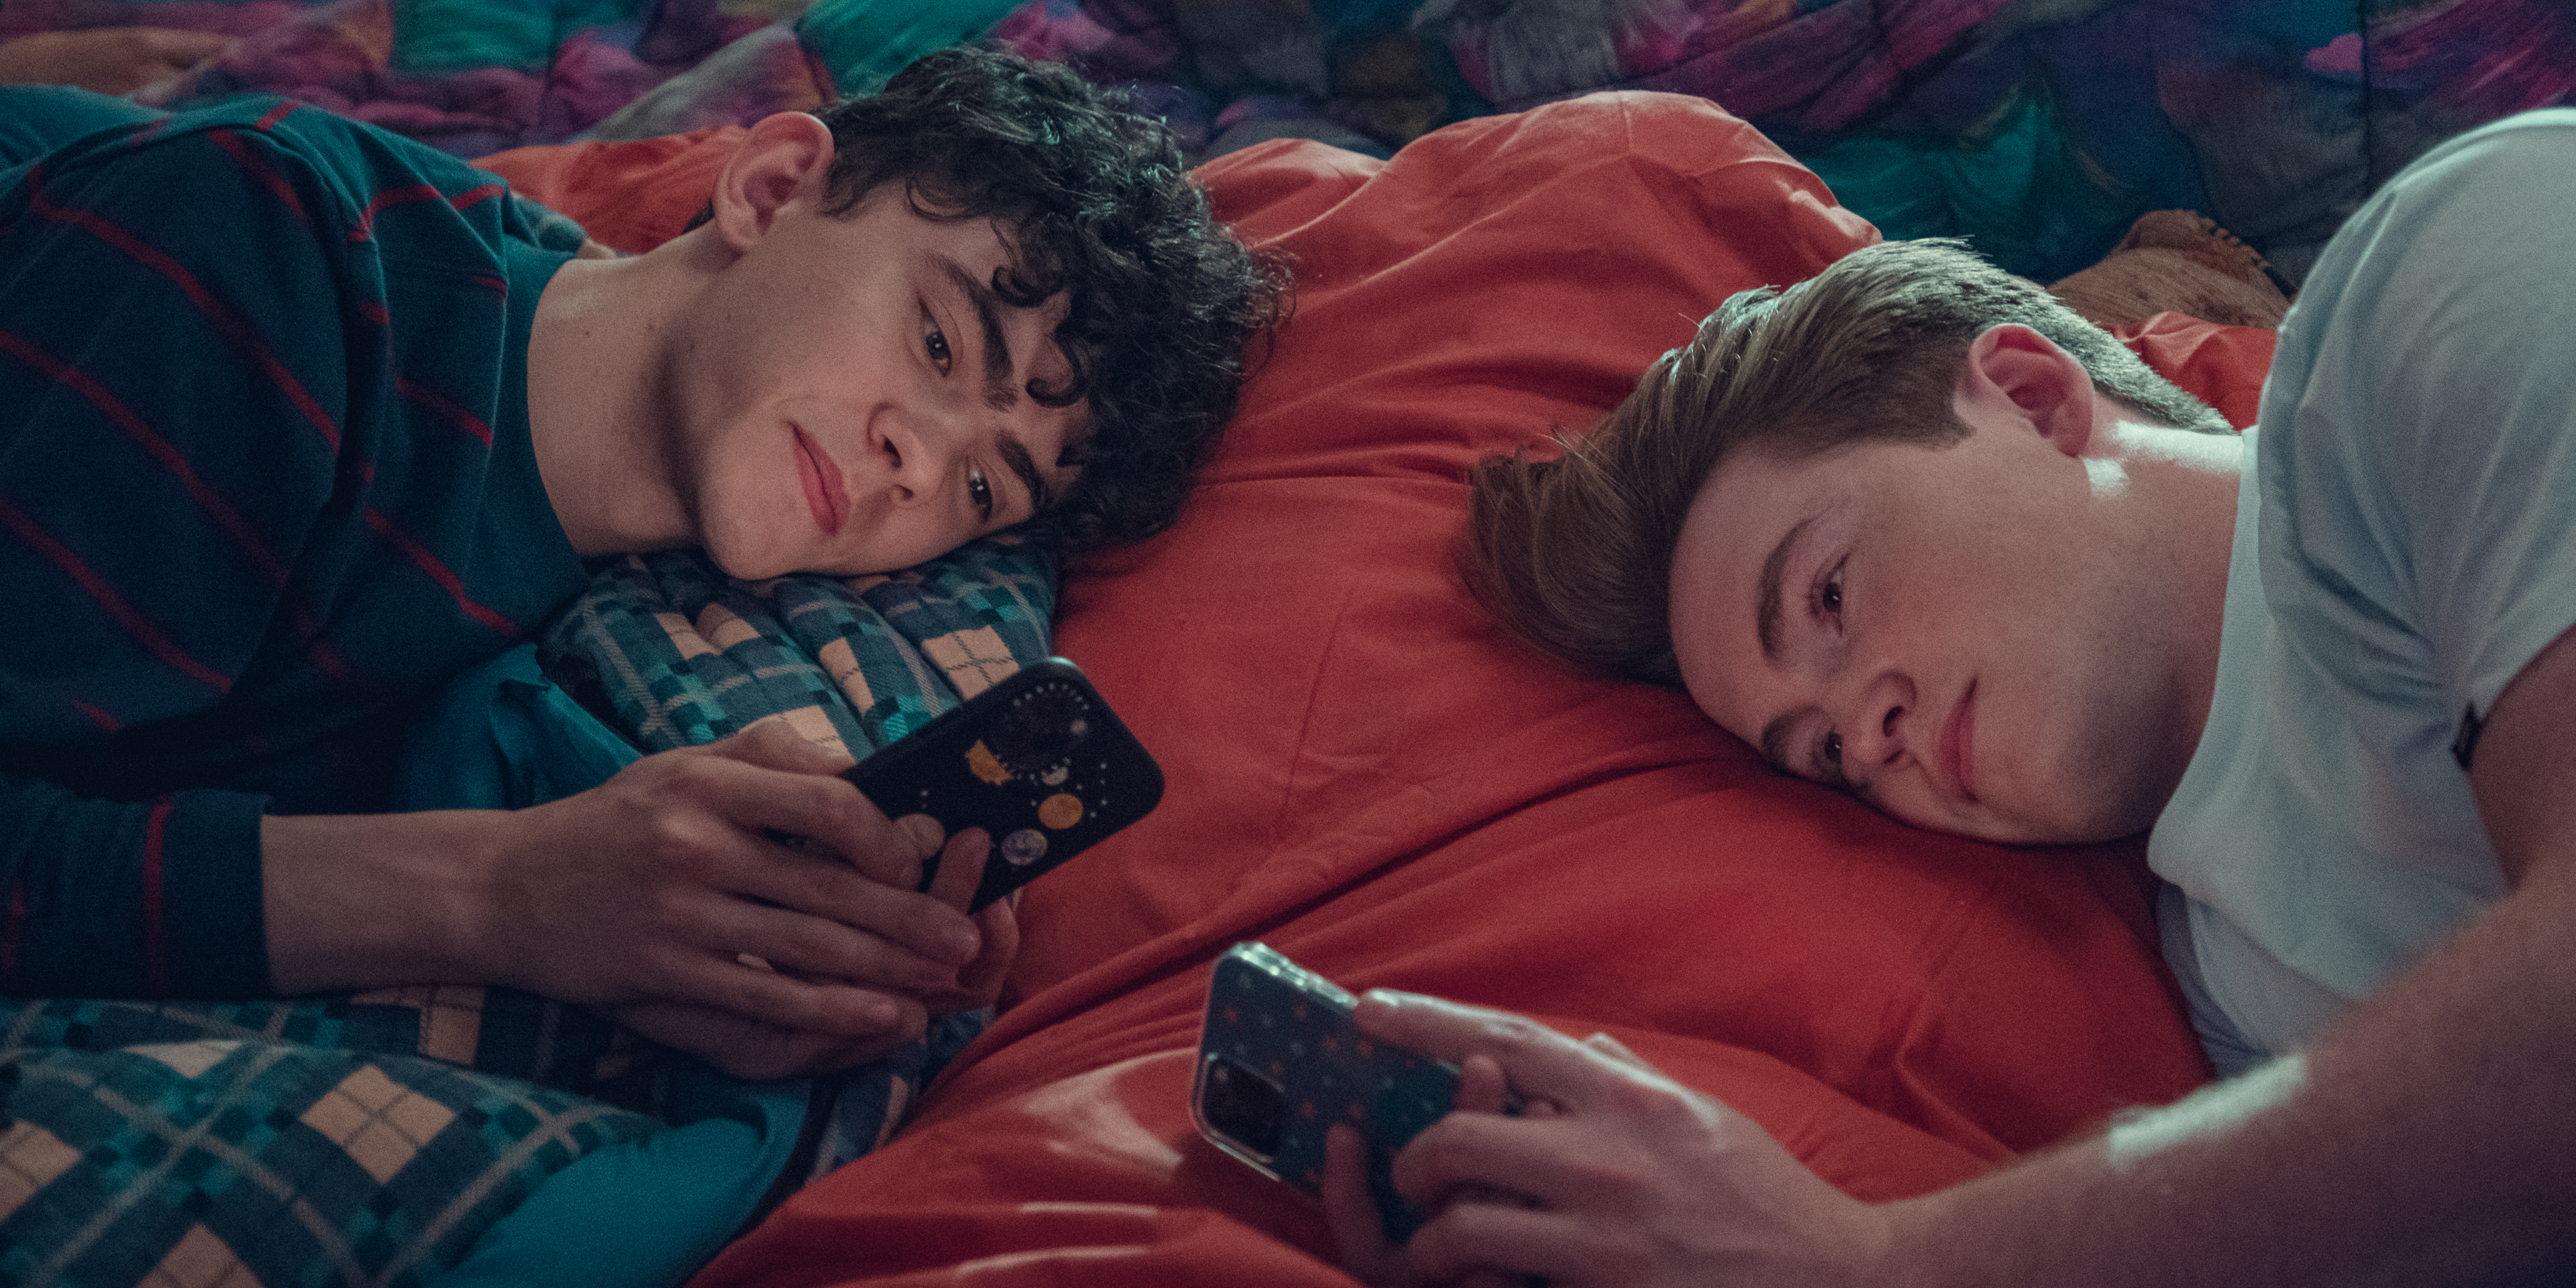 Nick and Charlie, from Heartstopper, laying side by side, looking at their phones.